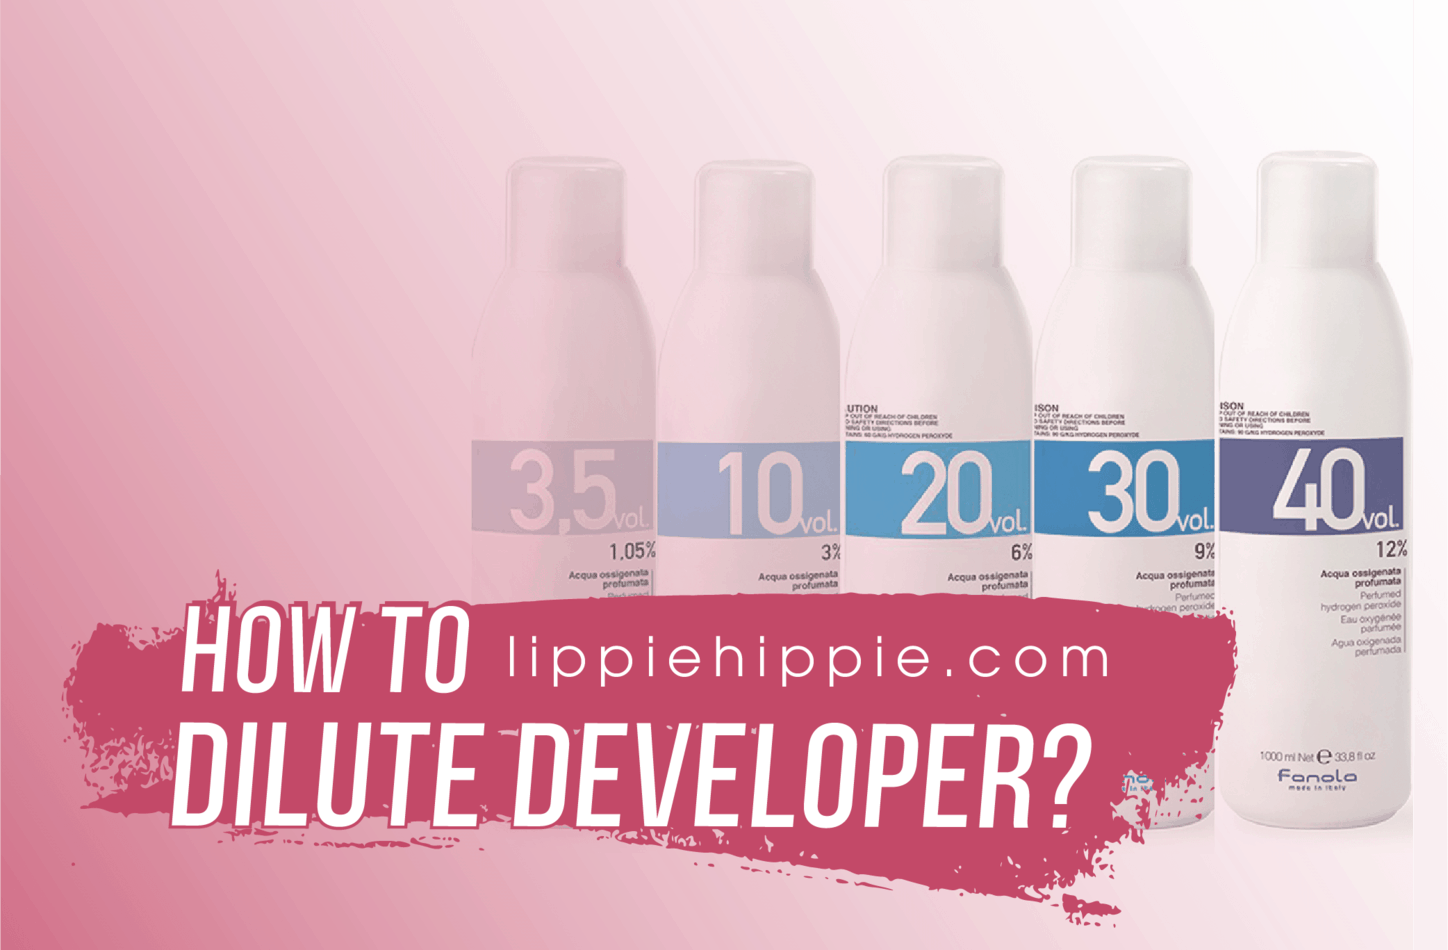 ᐅ How to Dilute Developer? (Dilute 40/30/20 Volume Developers)